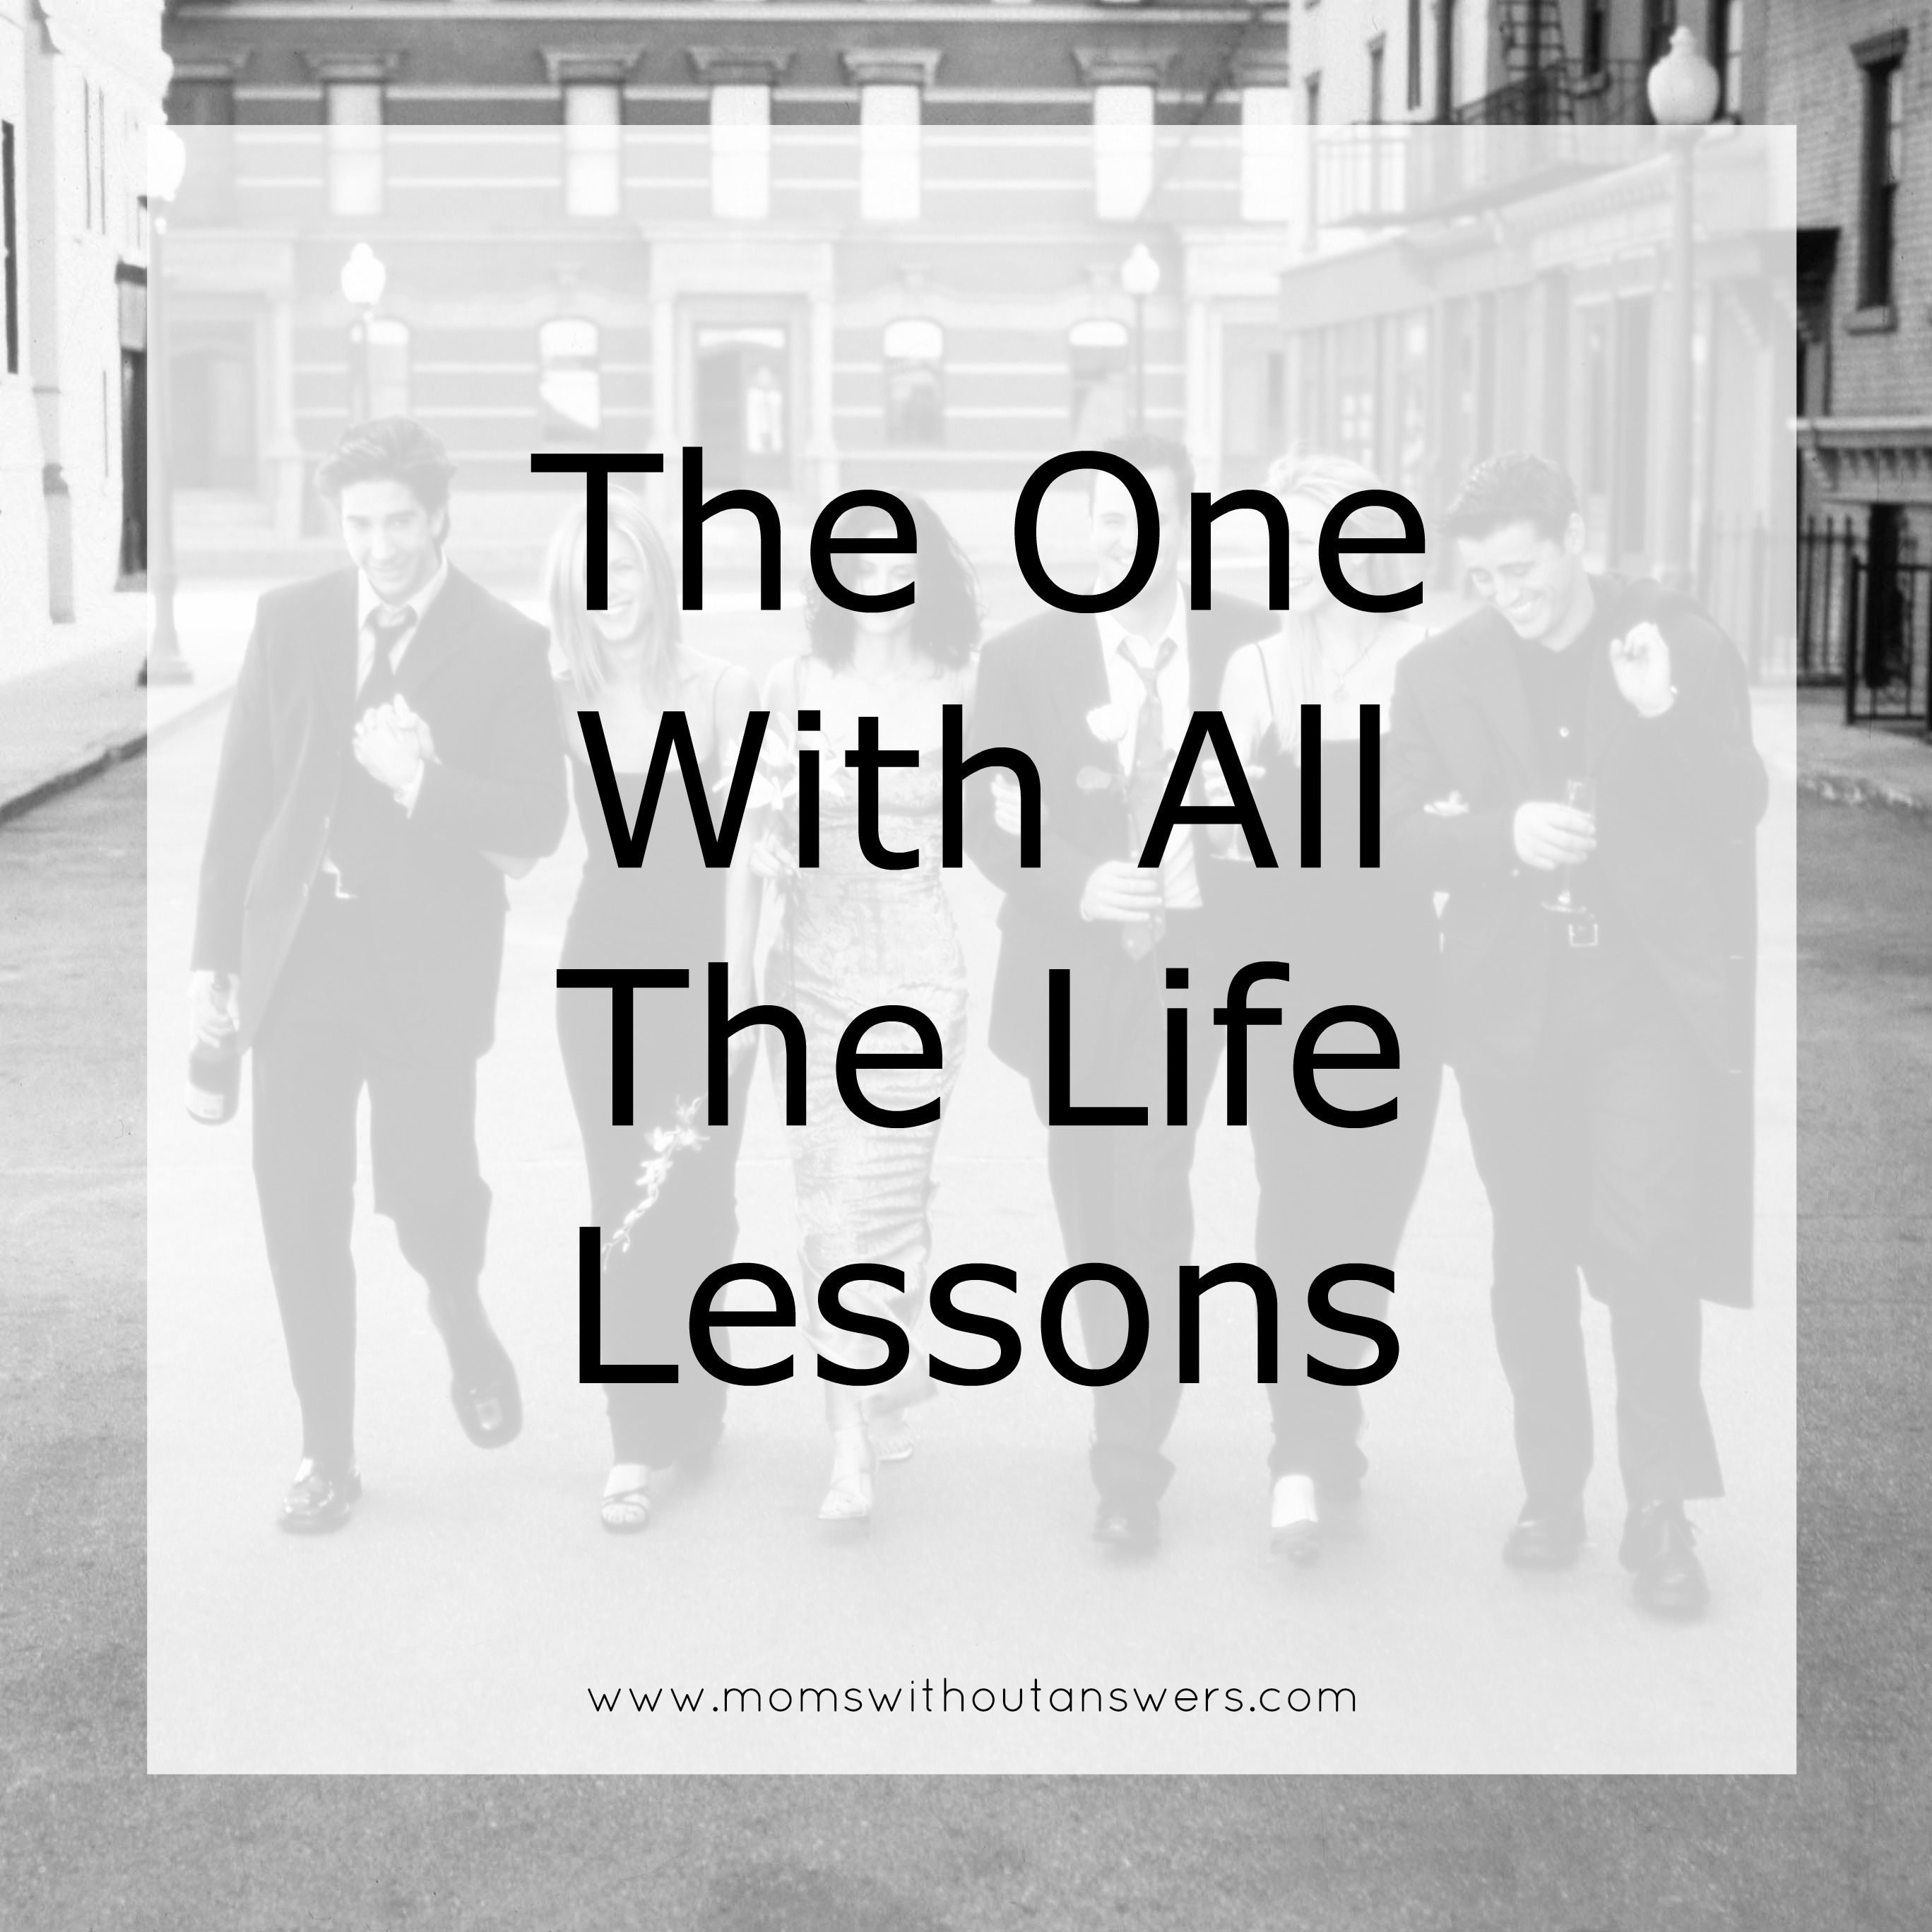 The One With All The Life Lessons